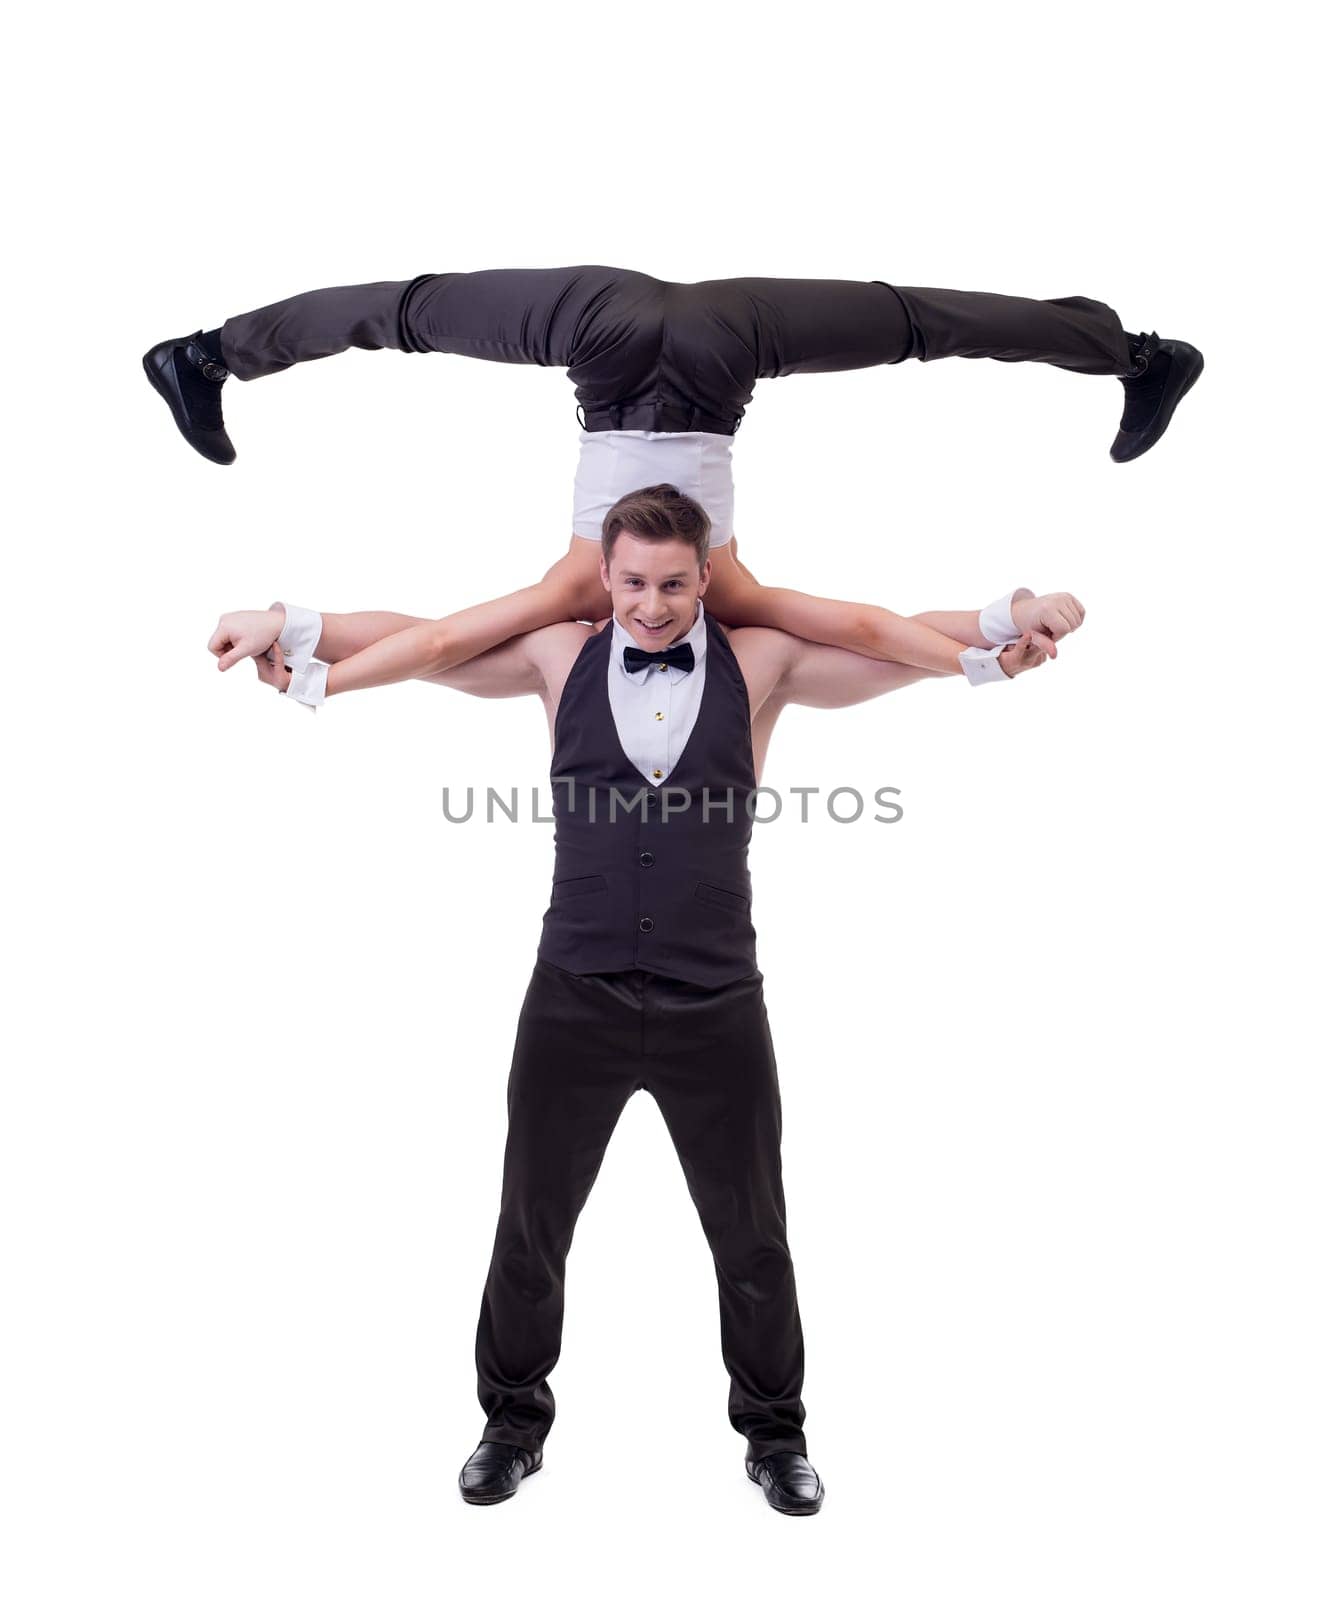 Cheerful male dancer holds on shoulders of his partner, isolated on white